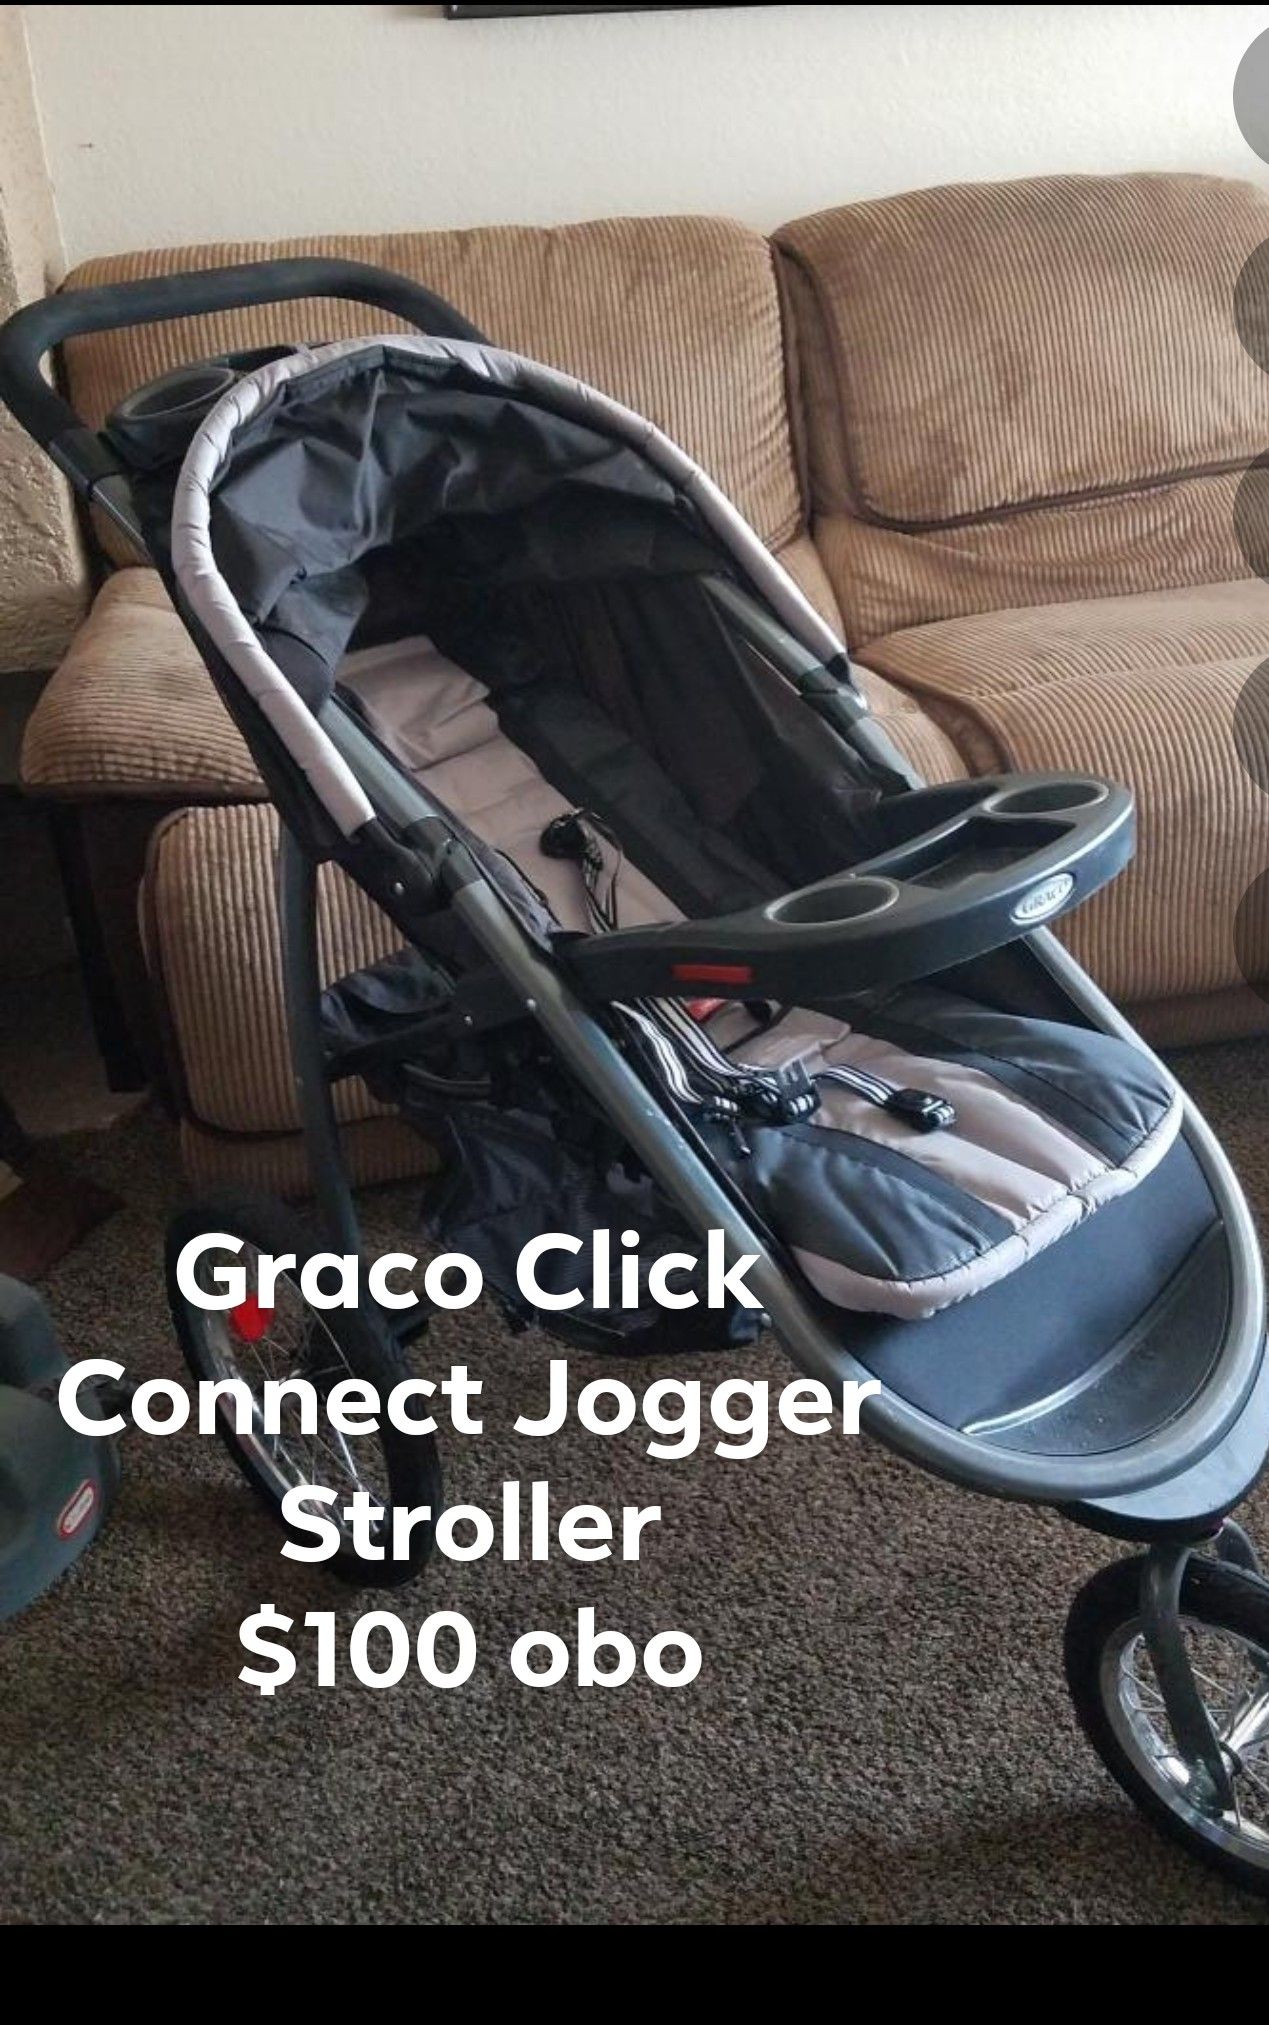 Graco Click Connect Jogger, Stroller and Car Seat